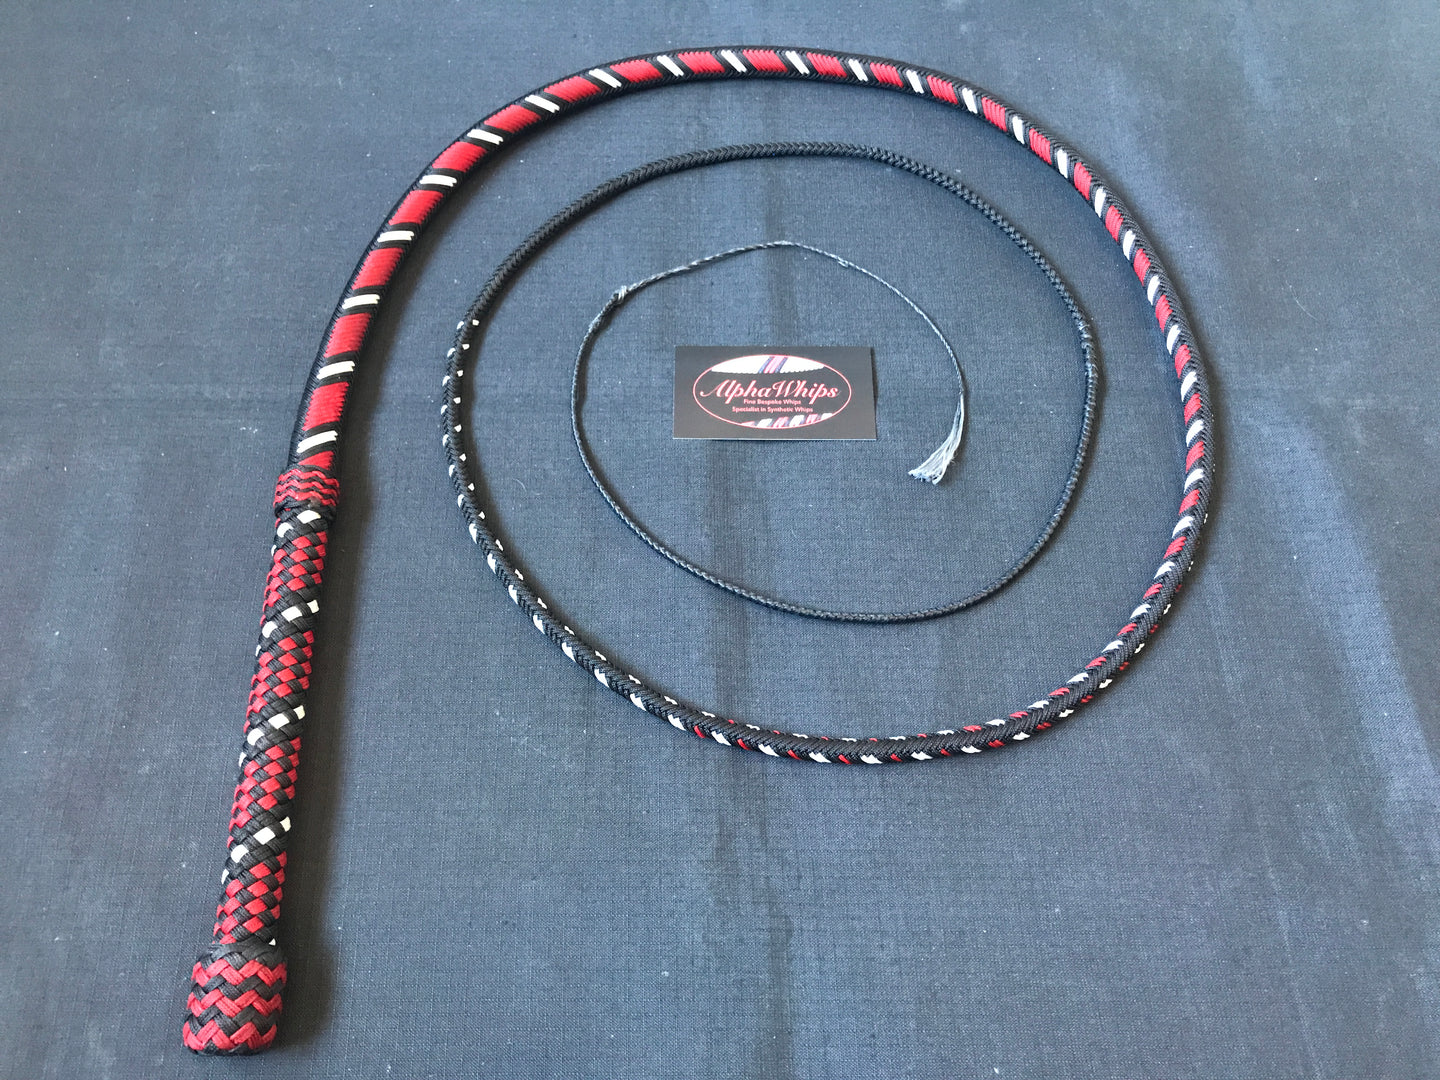 AlphaWhips 28 plait, Sport Series Nylon Paracord Bullwhip, 6 feet long. with Dyneema Fall, In black, red and white viper style pattern.